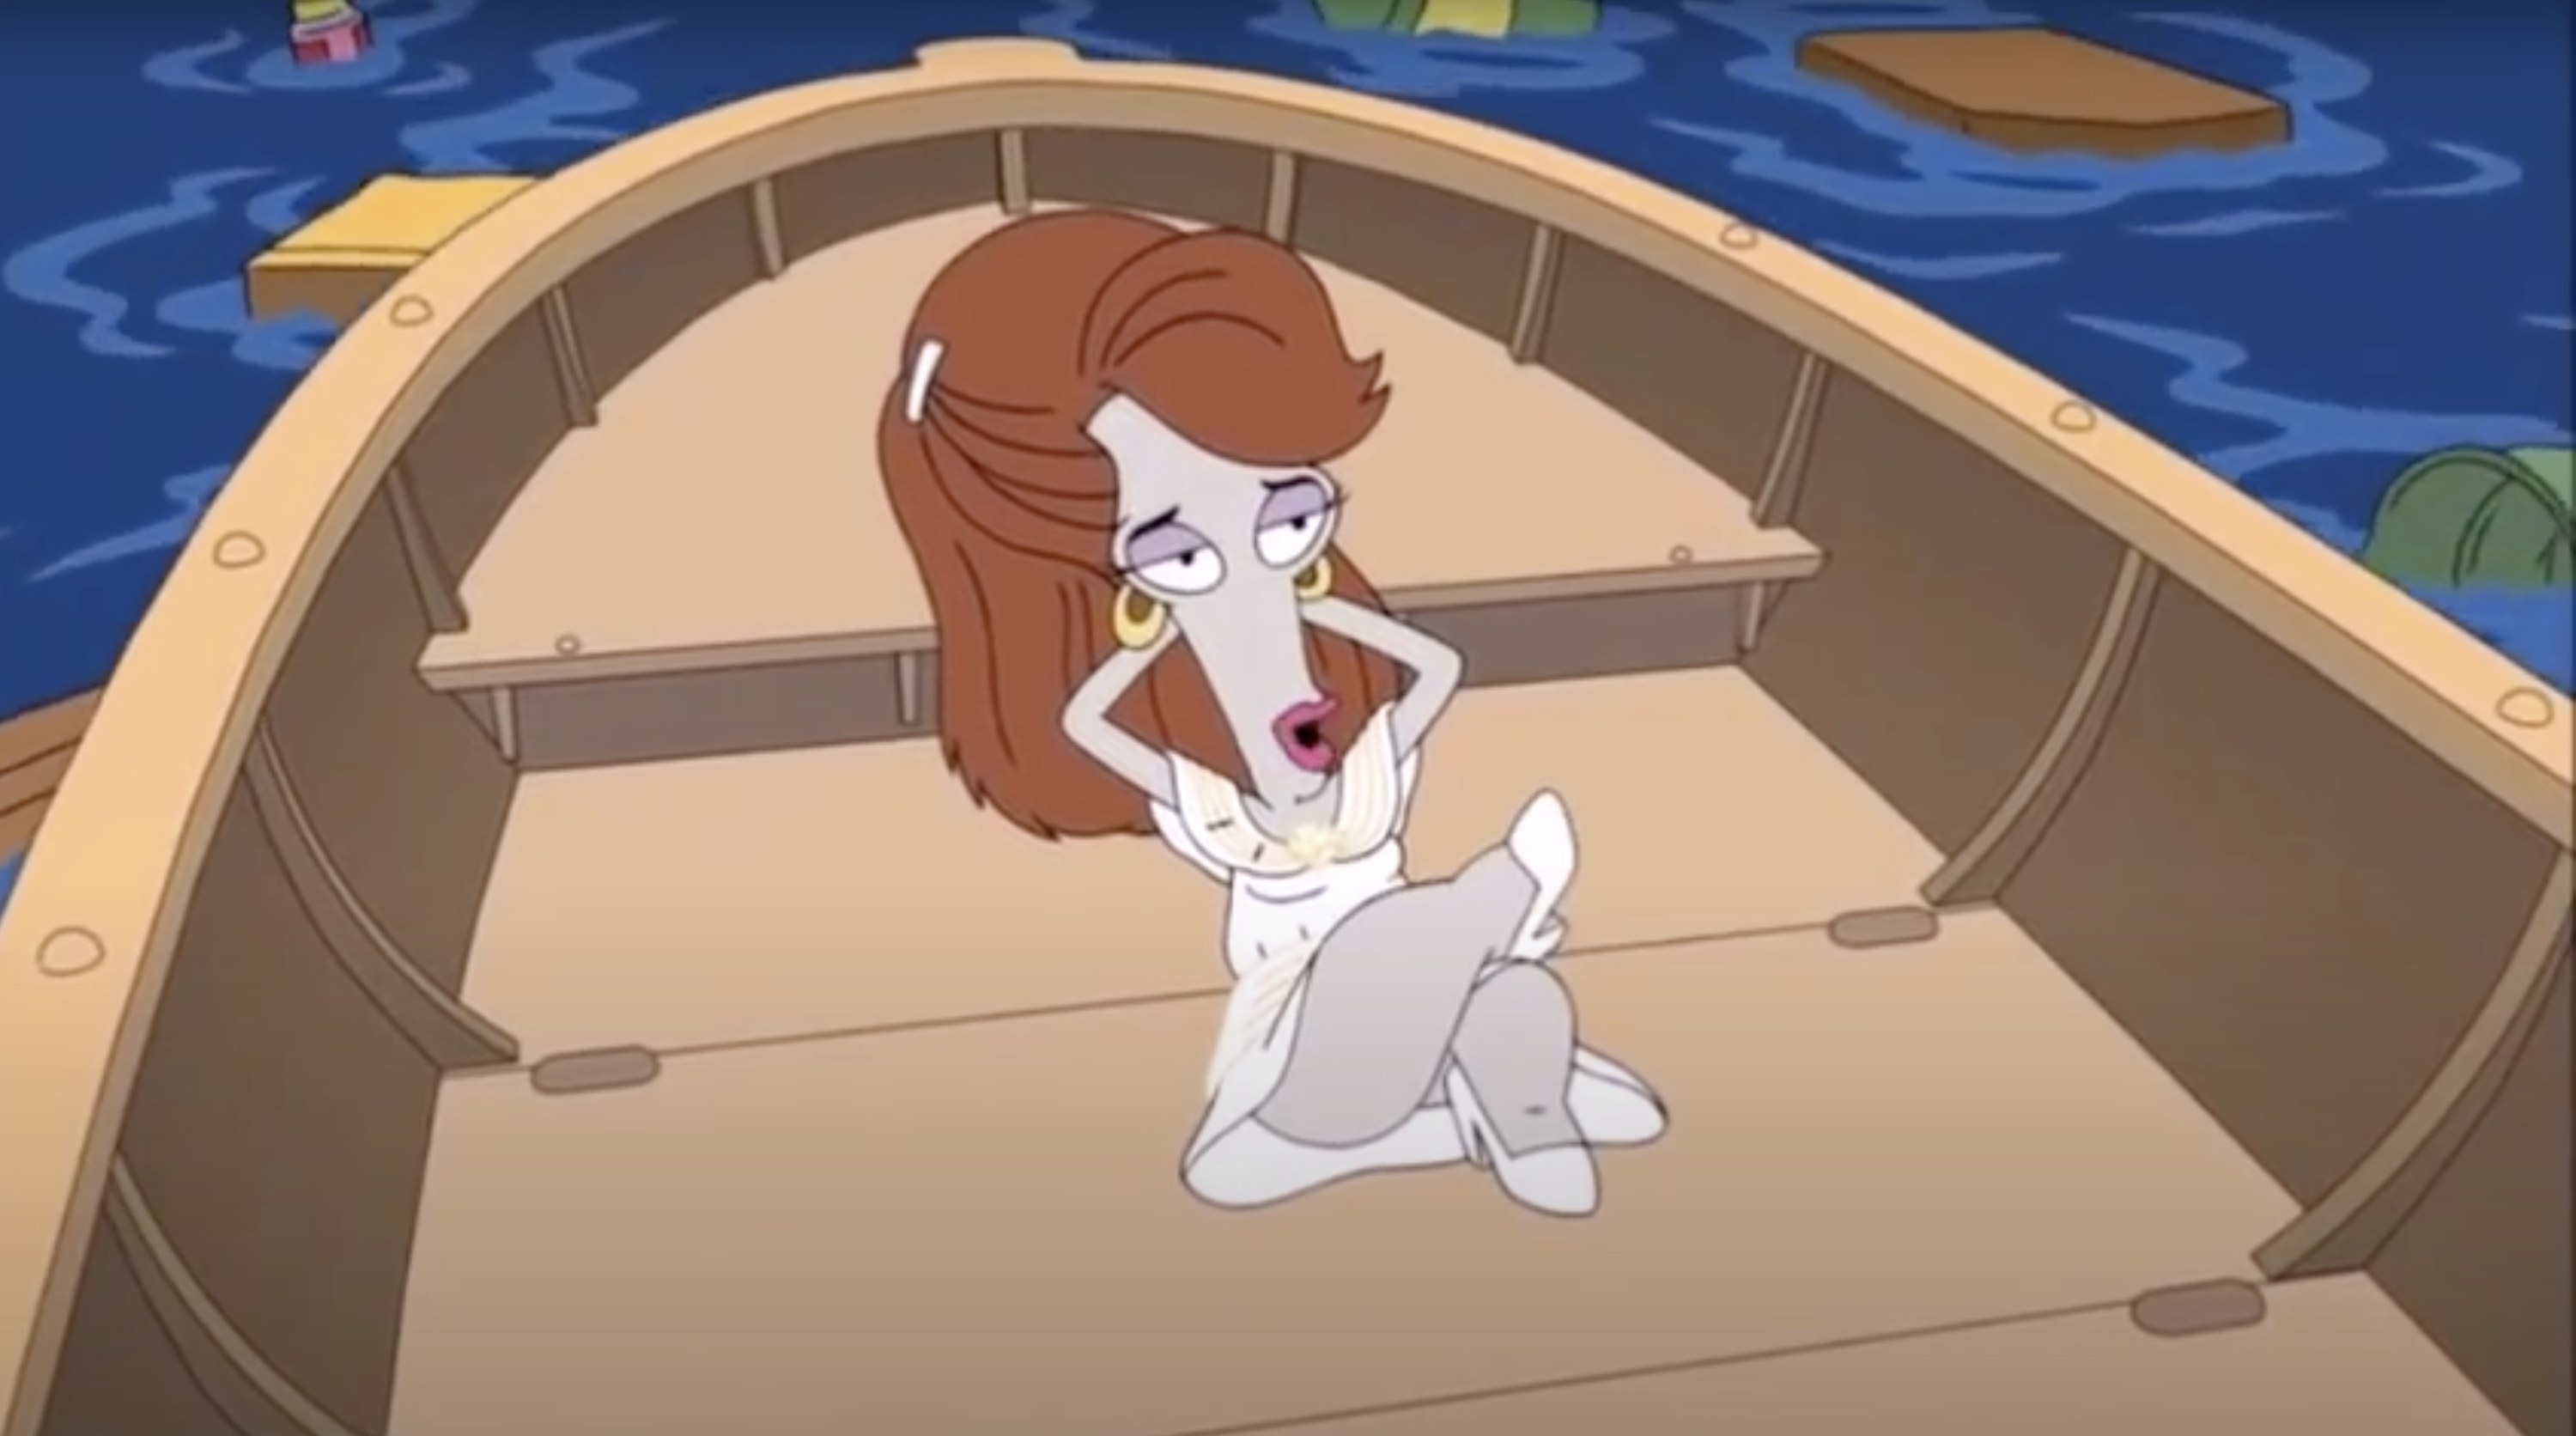 Roger dressed as lady relaxing in boat